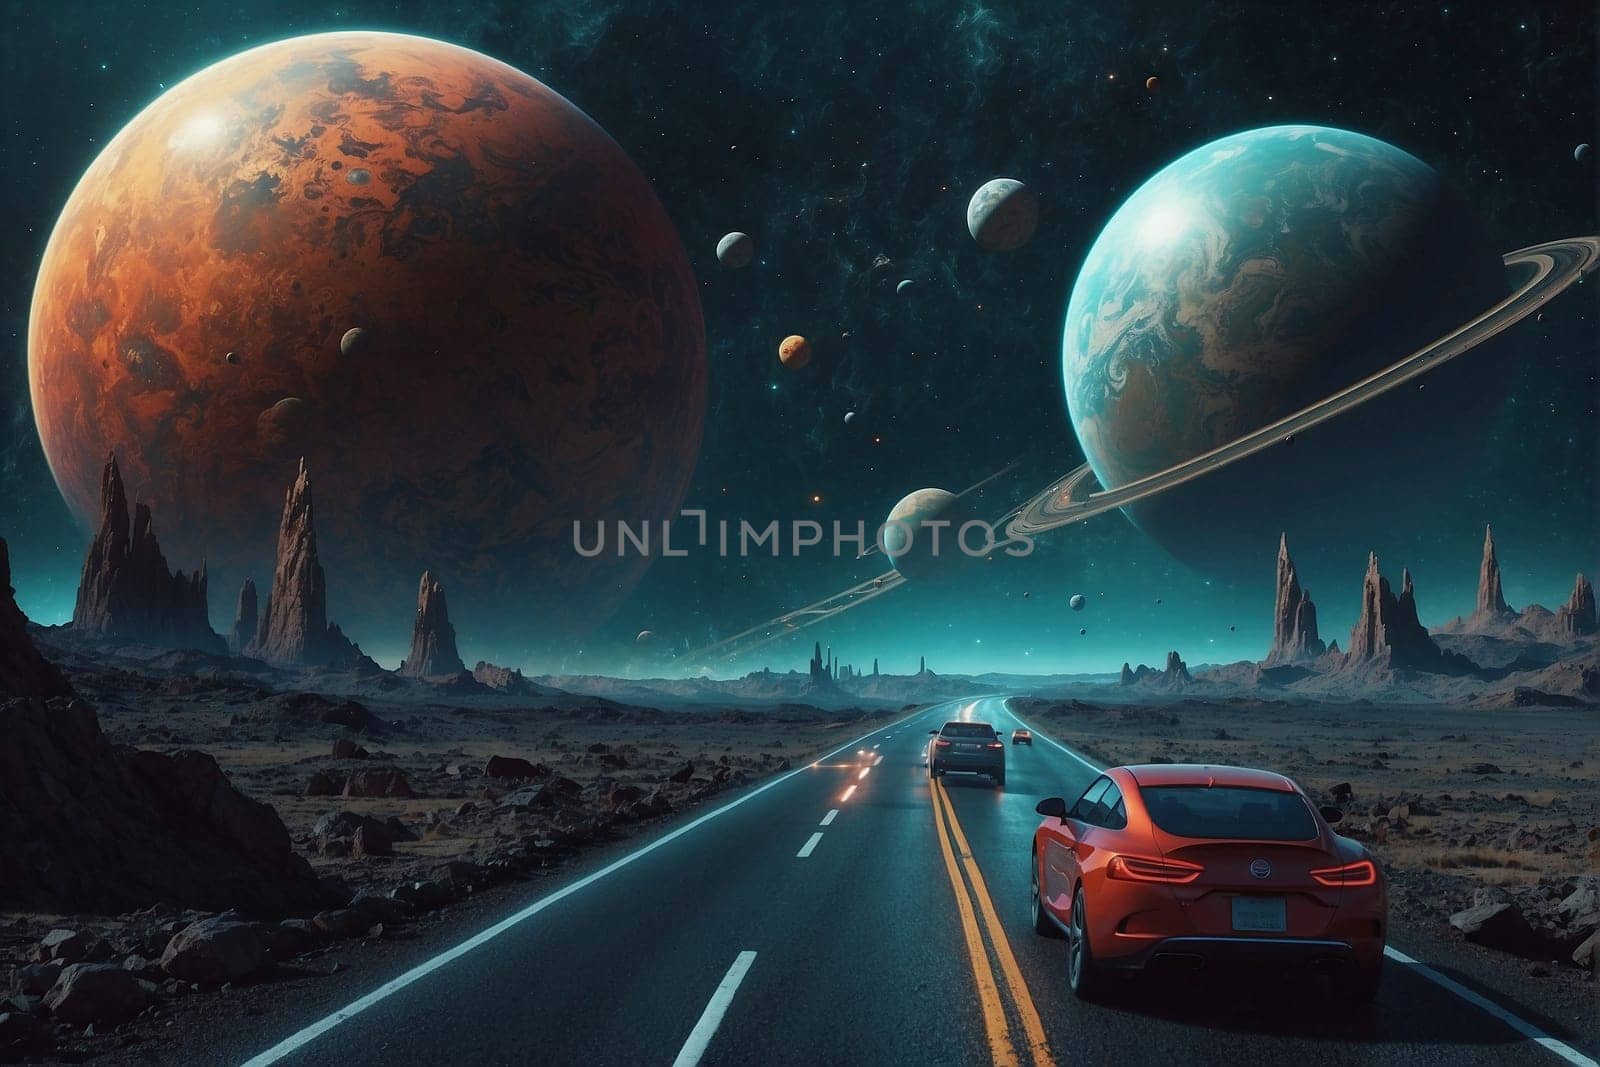 A red car drives down a road next to planets in this captivating image.